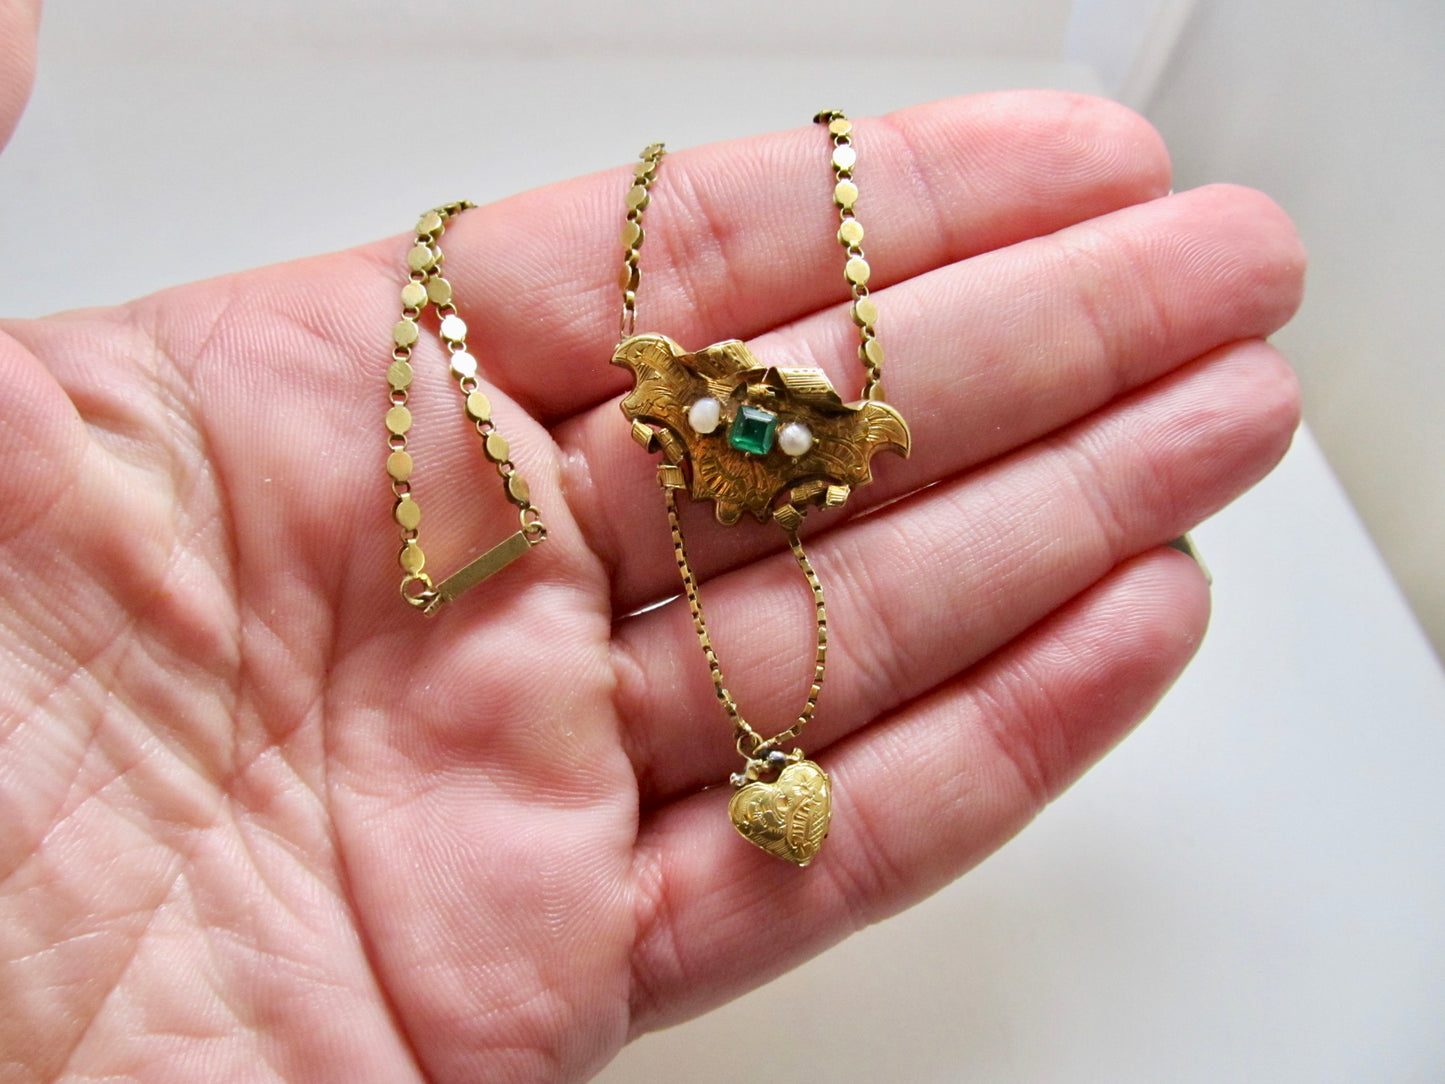 Victorian yellow gold emerald locket necklace